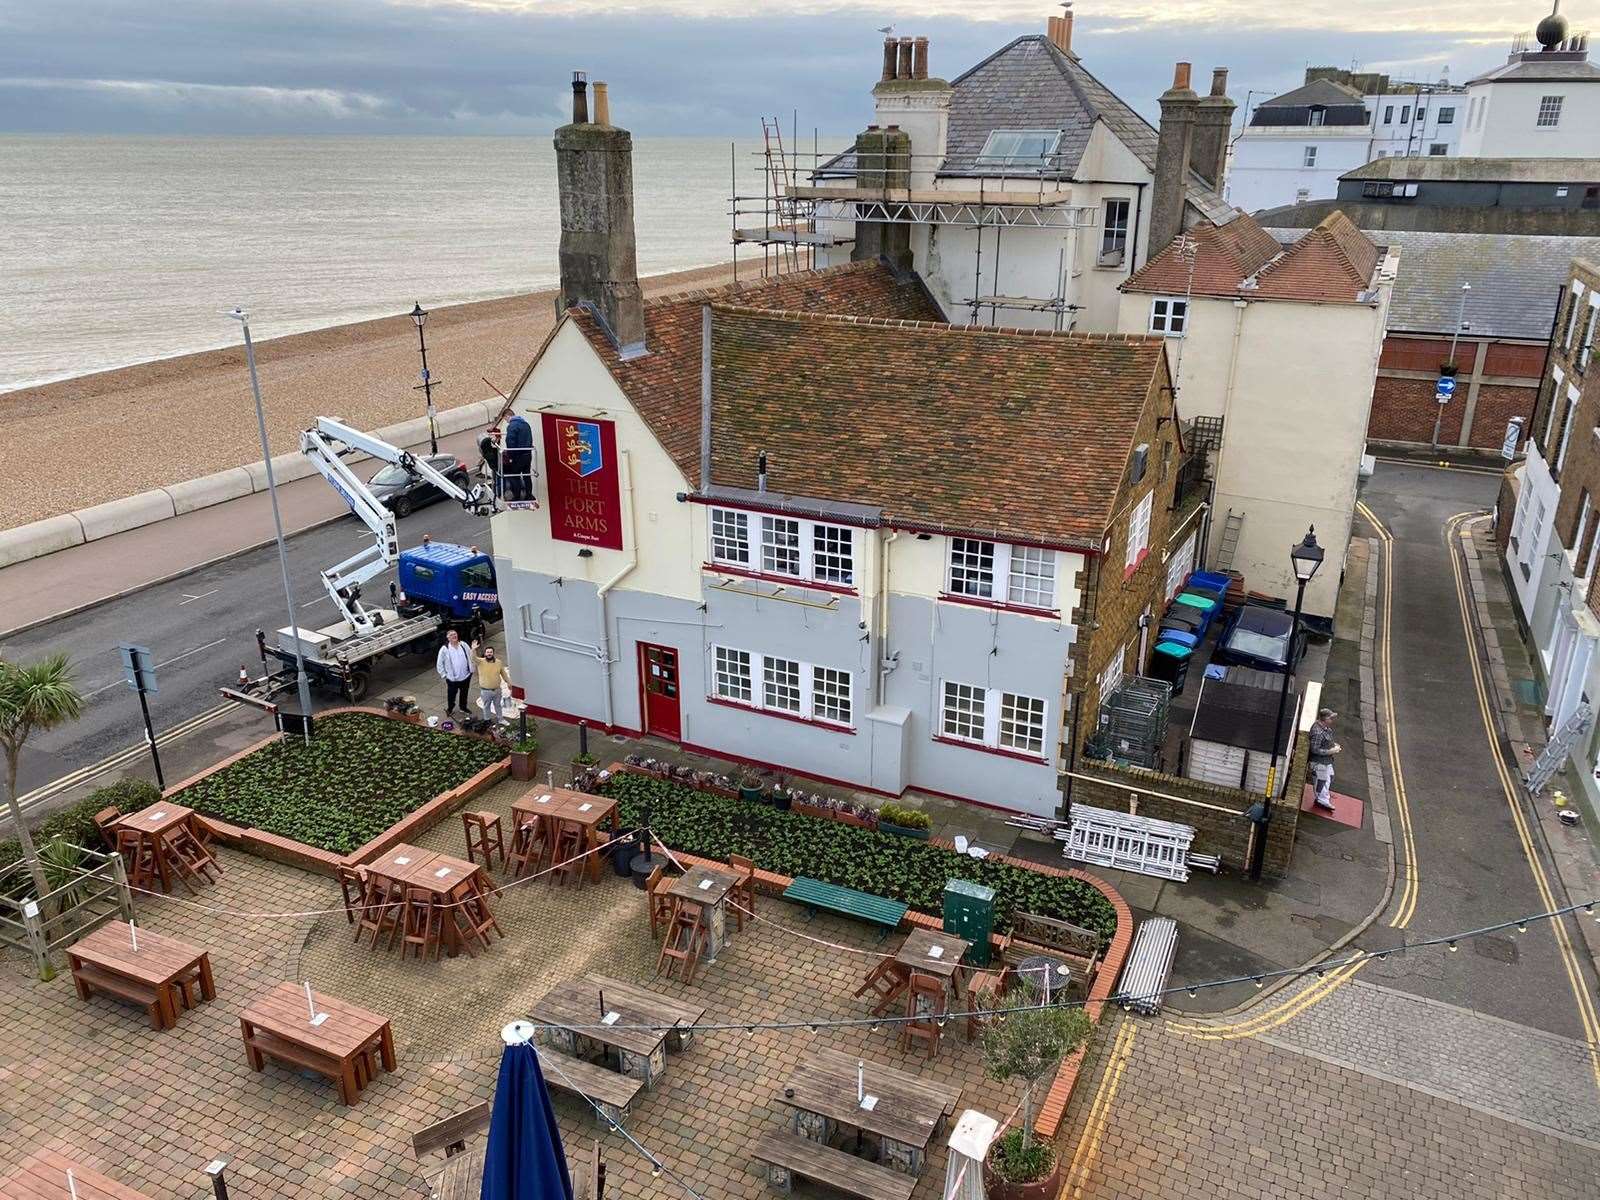 The Port Arms in Deal is getting a £50,000 makeover